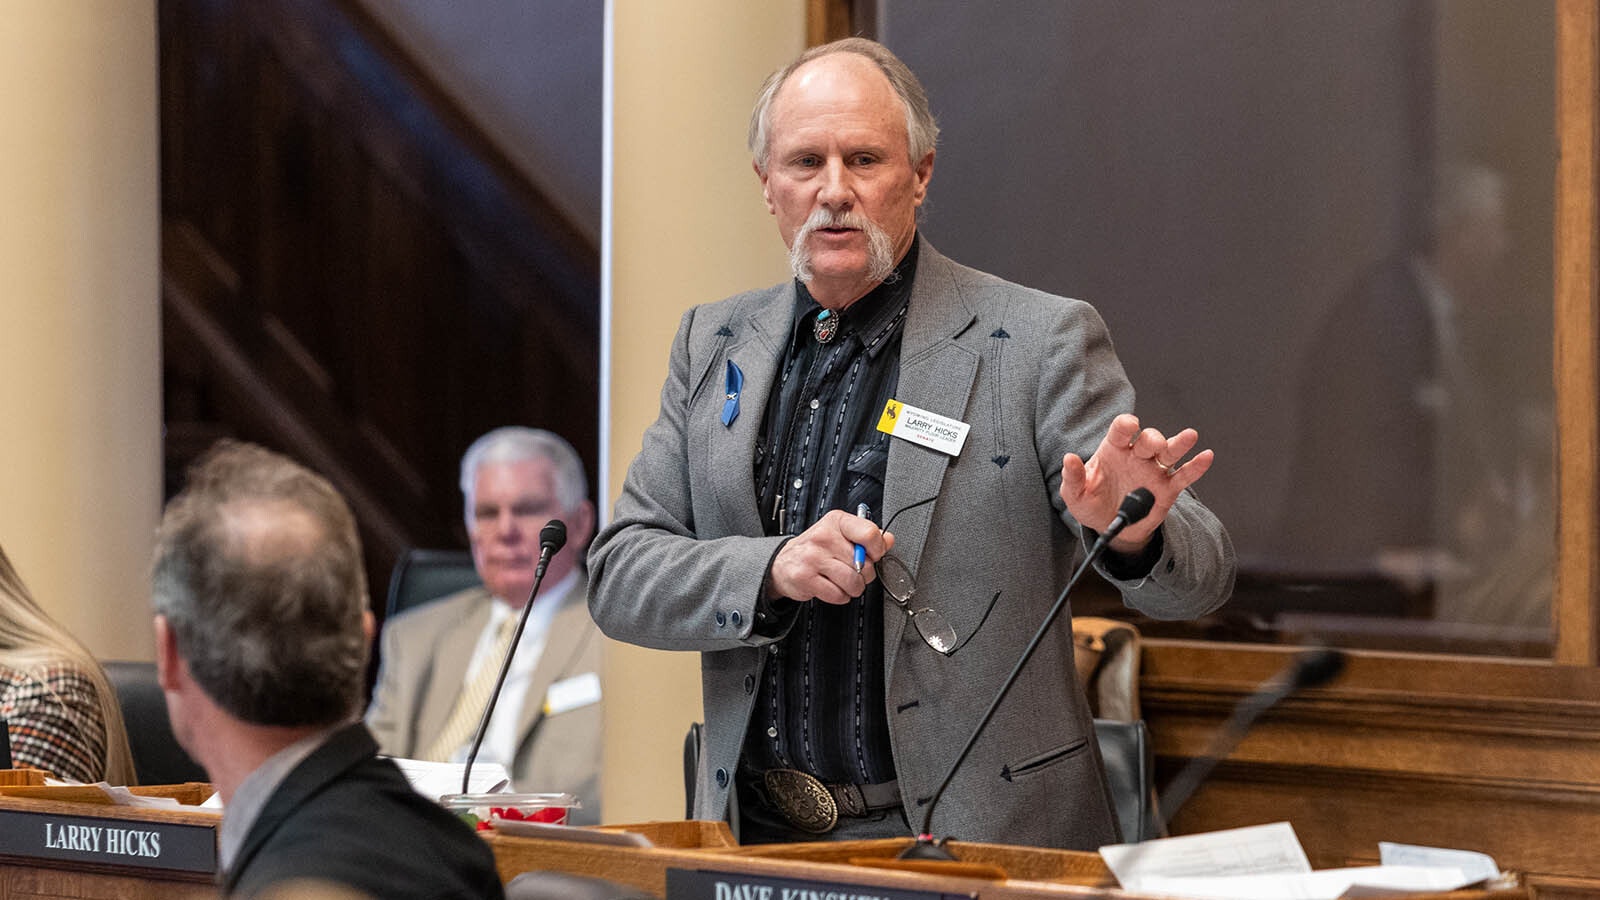 State Sen. Larry Hicks, R-Baggs, passed a pair of amendments to the Wyoming Senate's version of the budget that axes all $118 million budgeted for major capital construction.